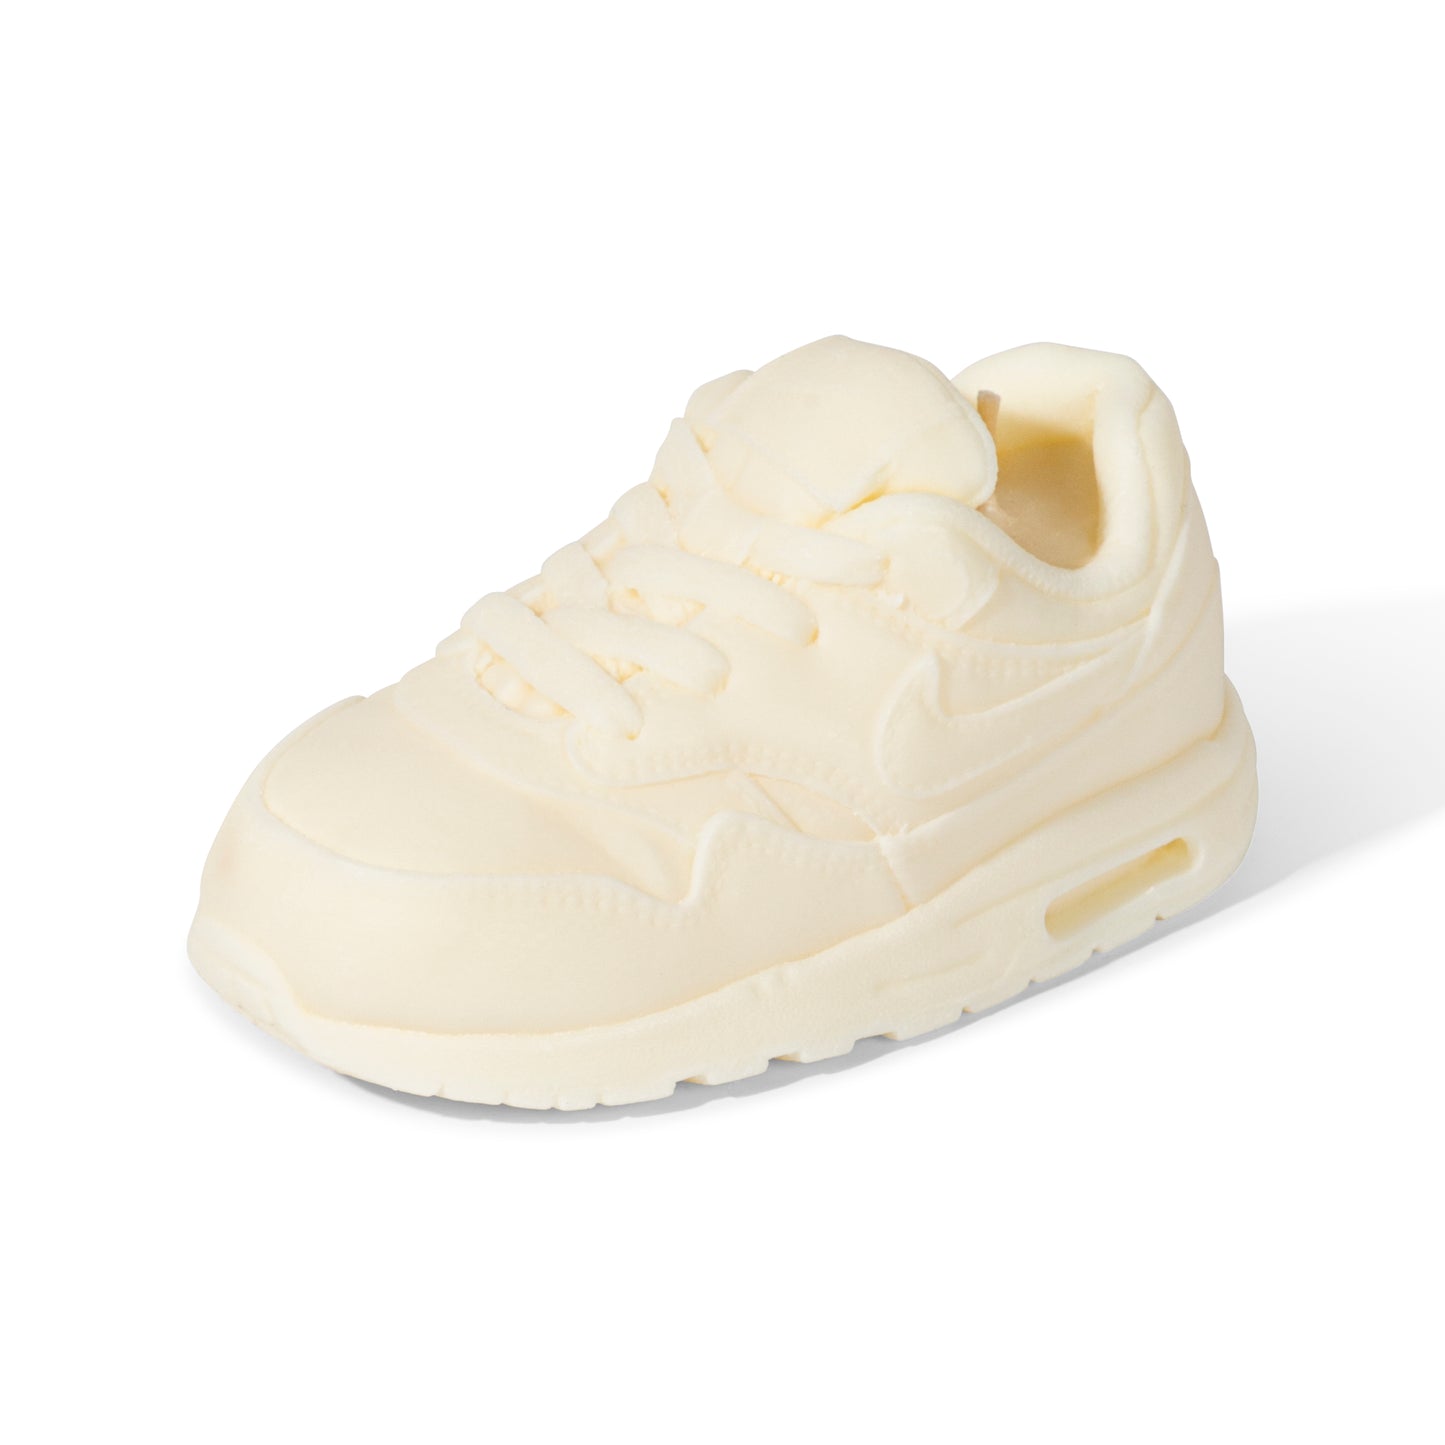 AM1 - Sneaker candle